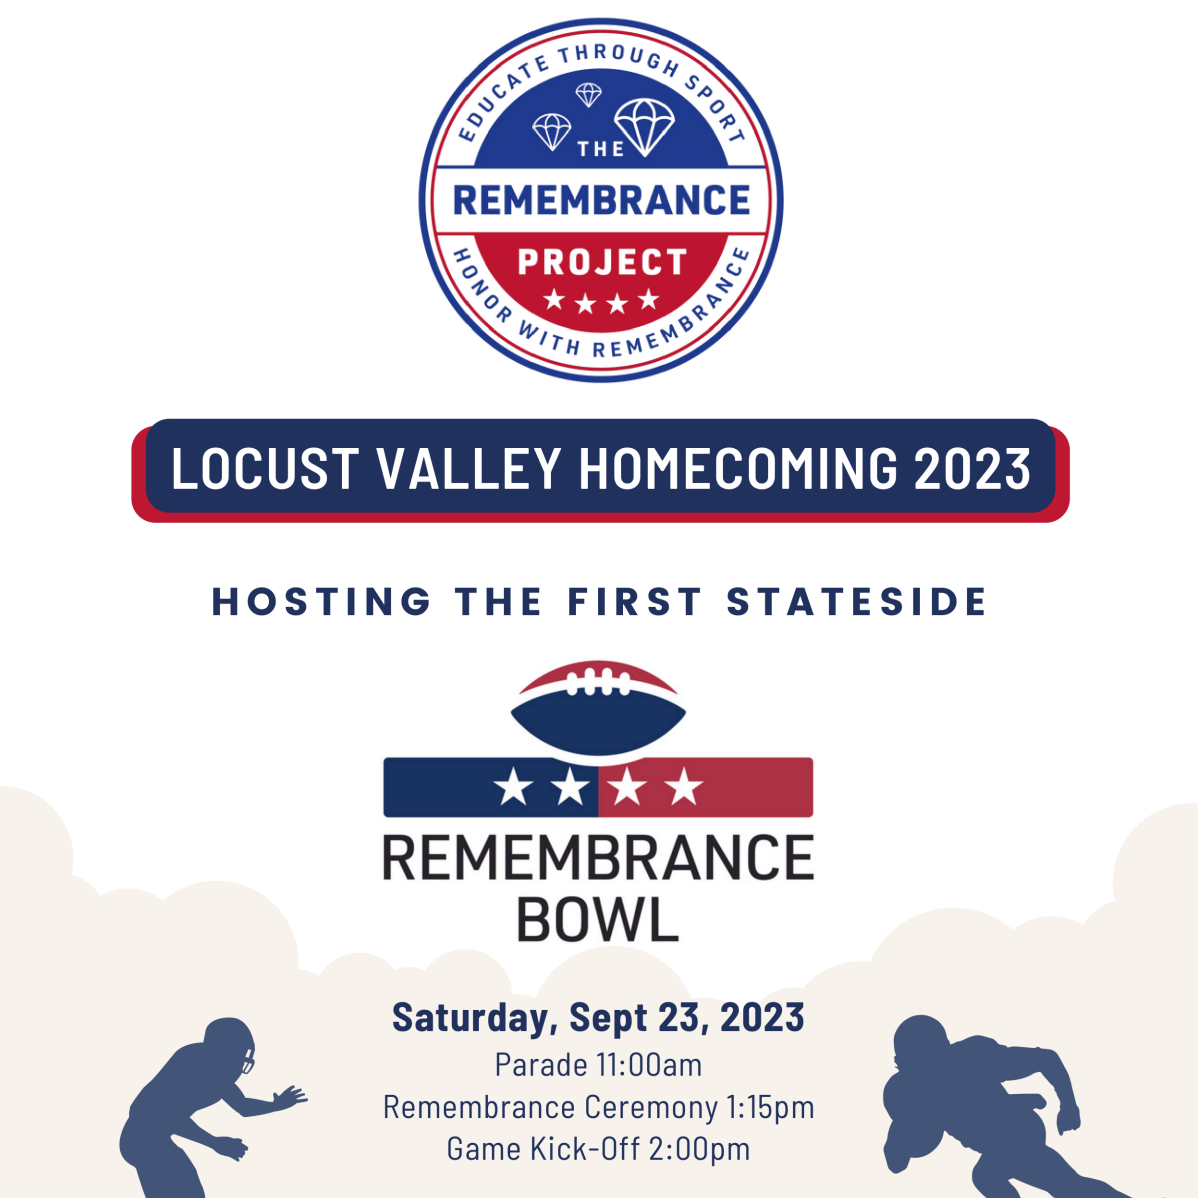  Locust Valley Homecoming 2023 Remembrance Bowl